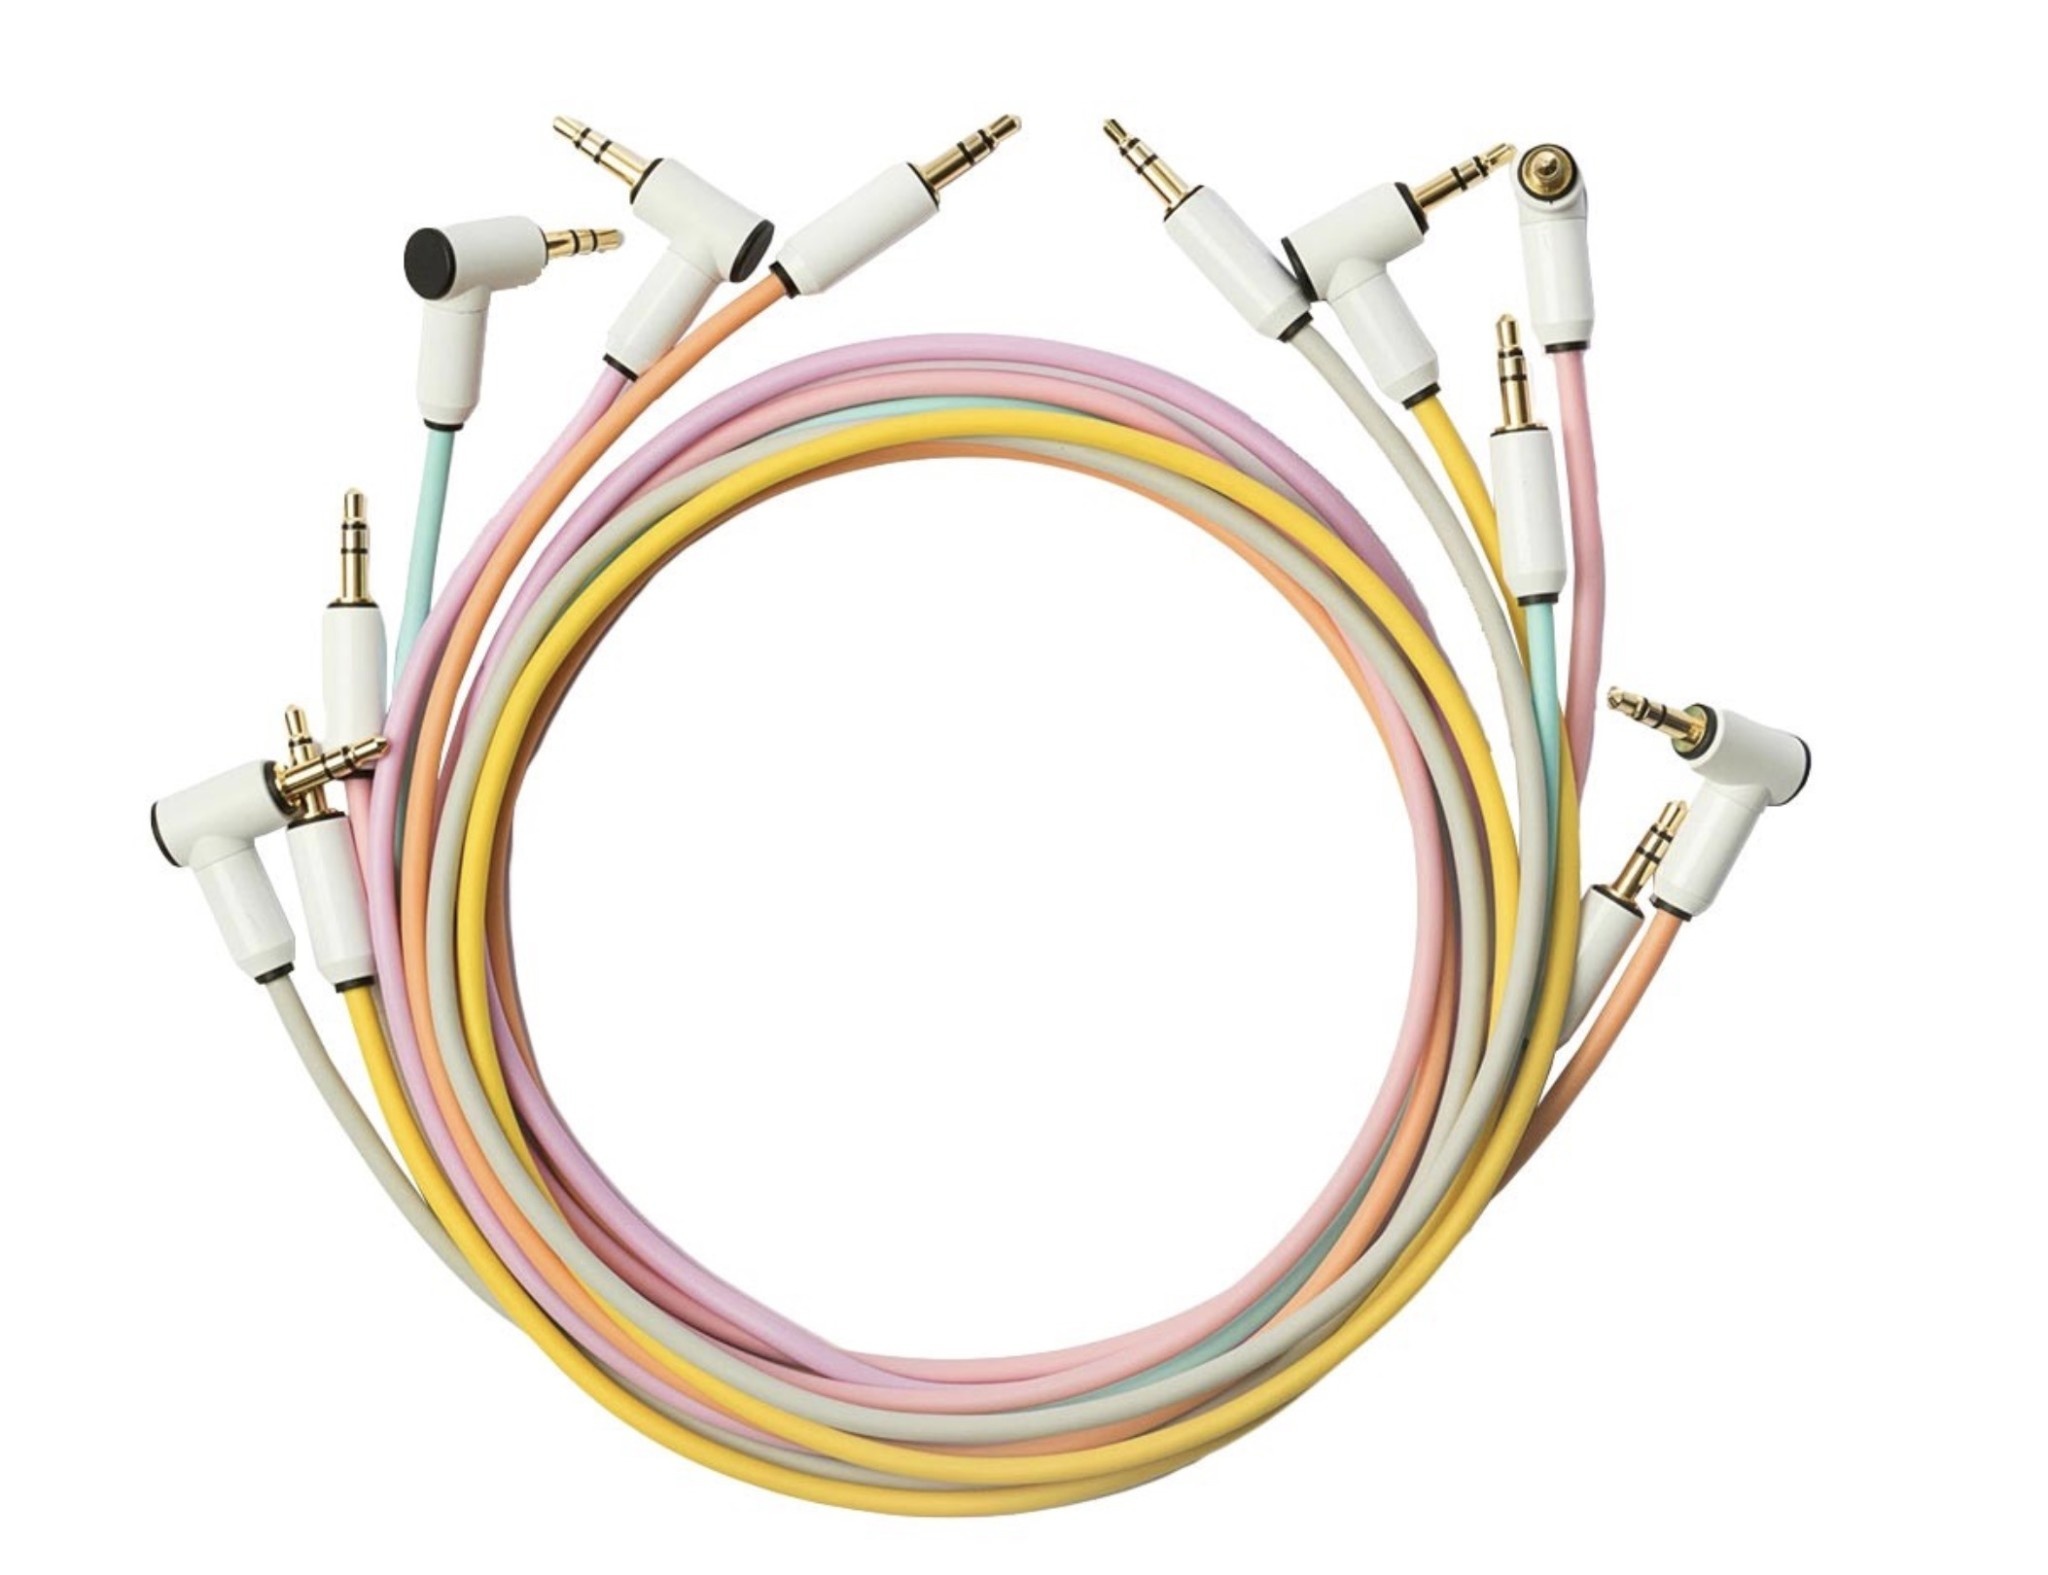 What Voltage Is Audio Cable Rated To